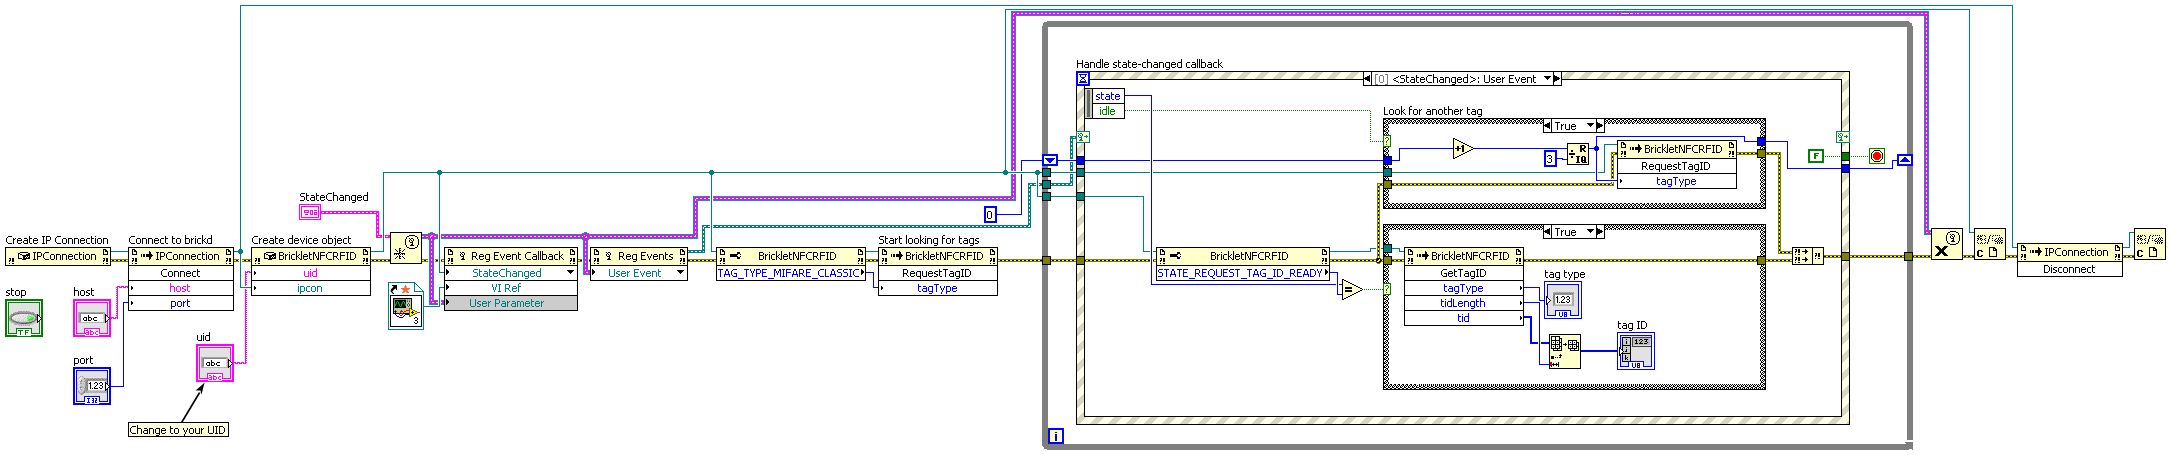 LabVIEW Scan For Tags Example